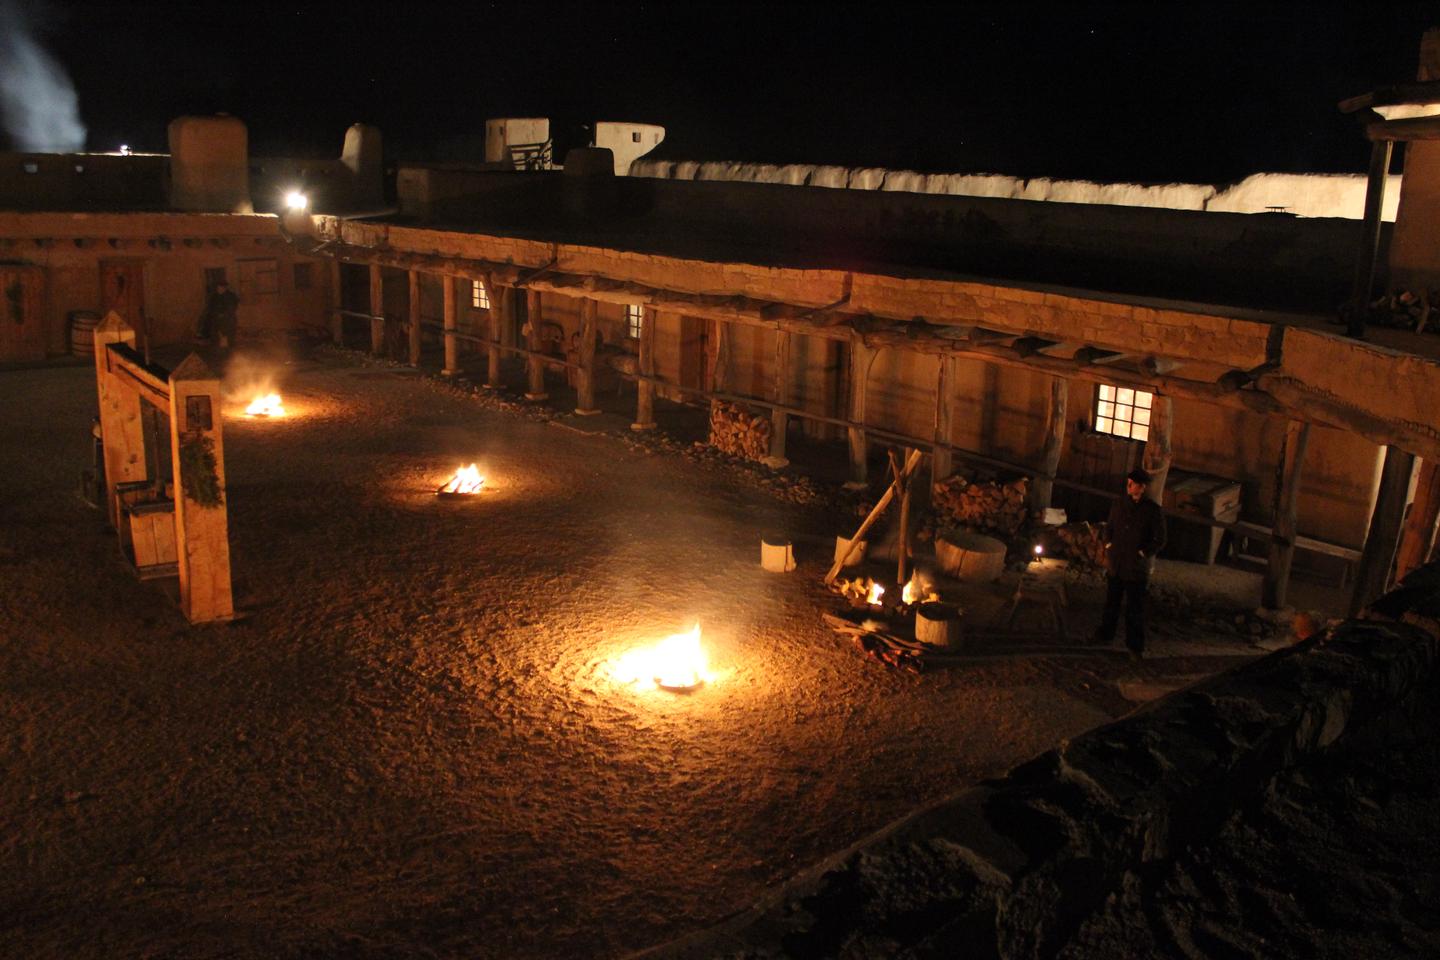 The plaza of Bent's Old Fort at night lit with fires